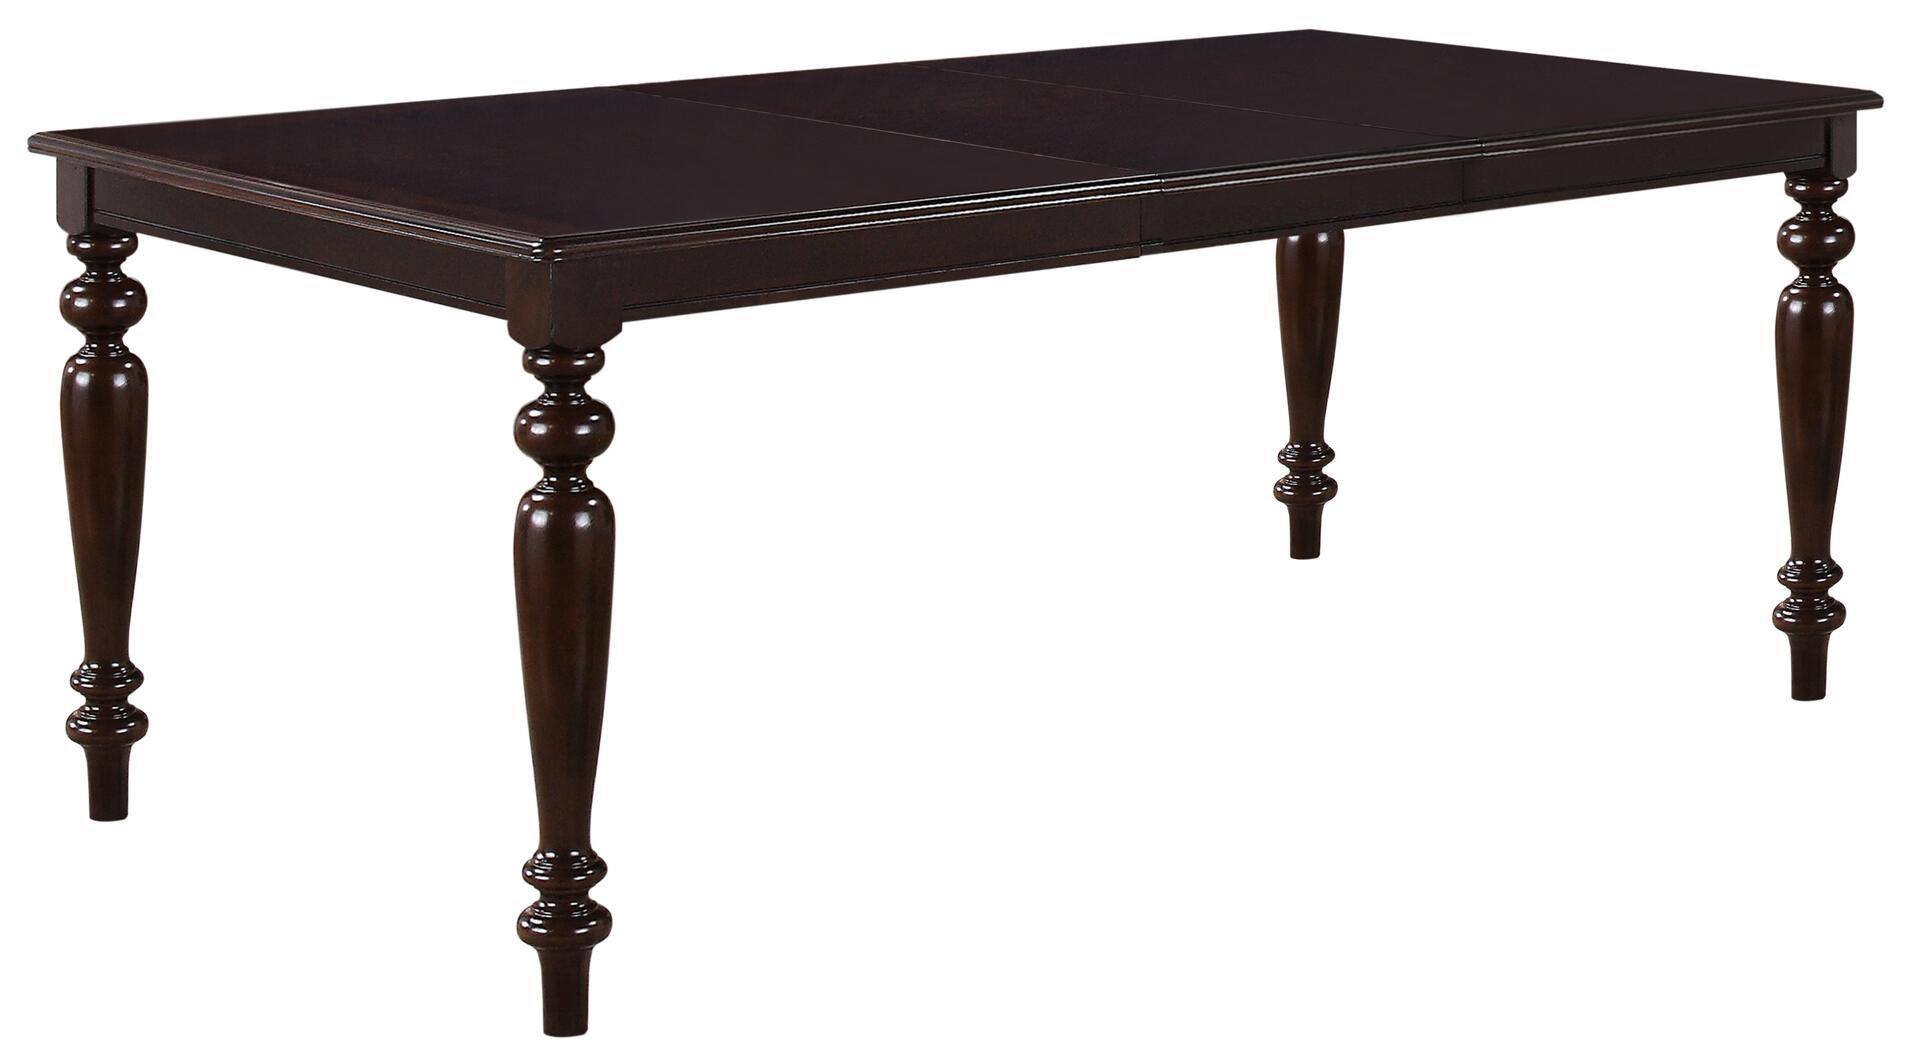 Transitional Dining Table Zora 2020PIZOR in Cherry 